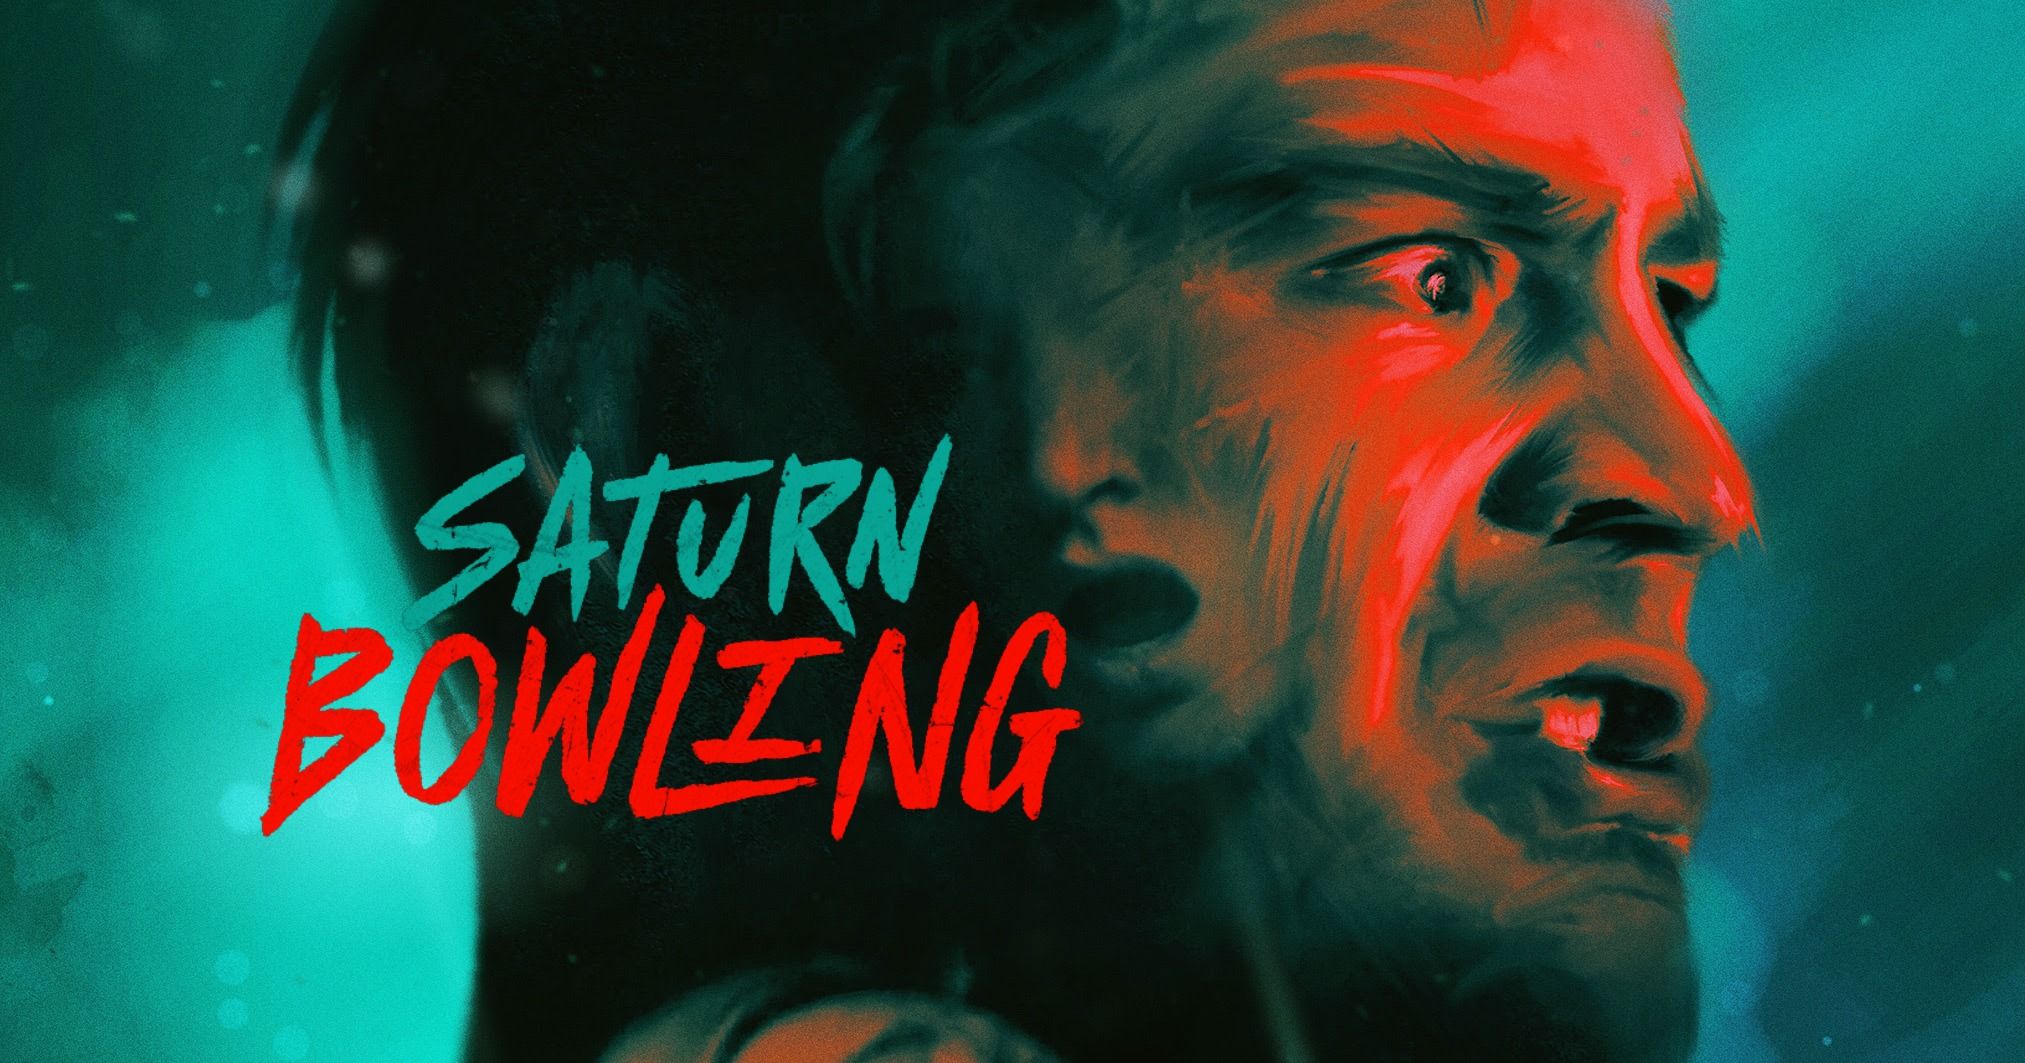 Saturn Bowling Review | A Captivating and Violent Dive Into Hereditary Brutality